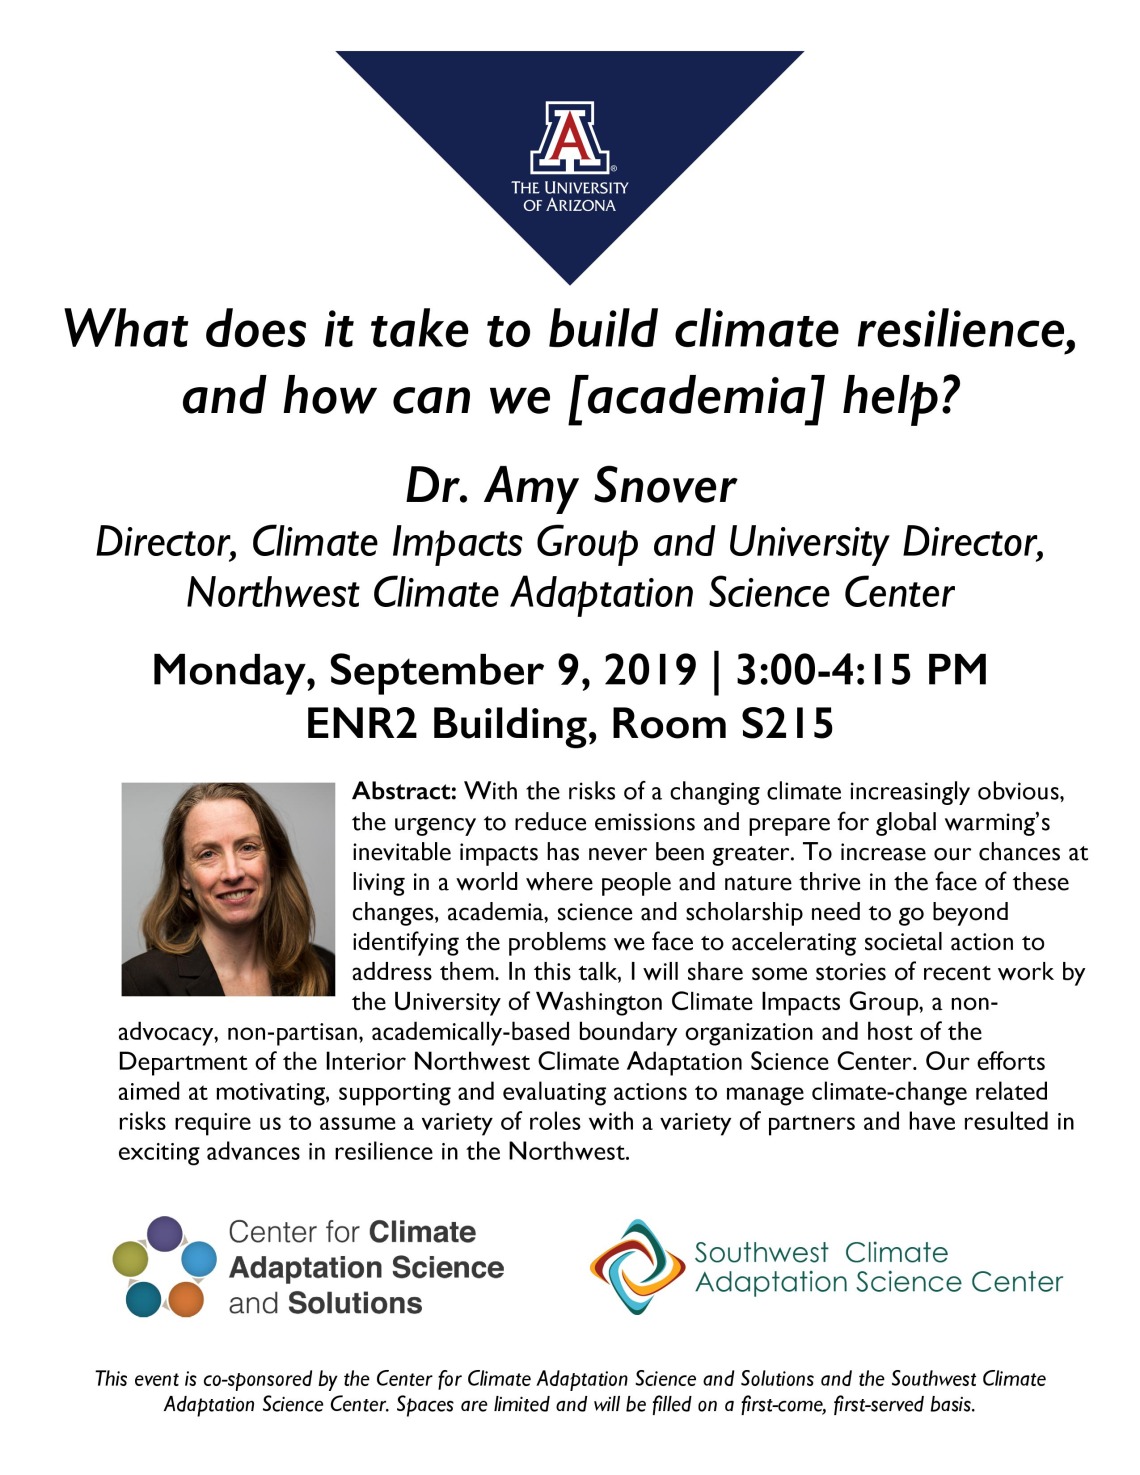 Flyer for "What does it take to build climate resilience, and how can we [academia] help?" event.